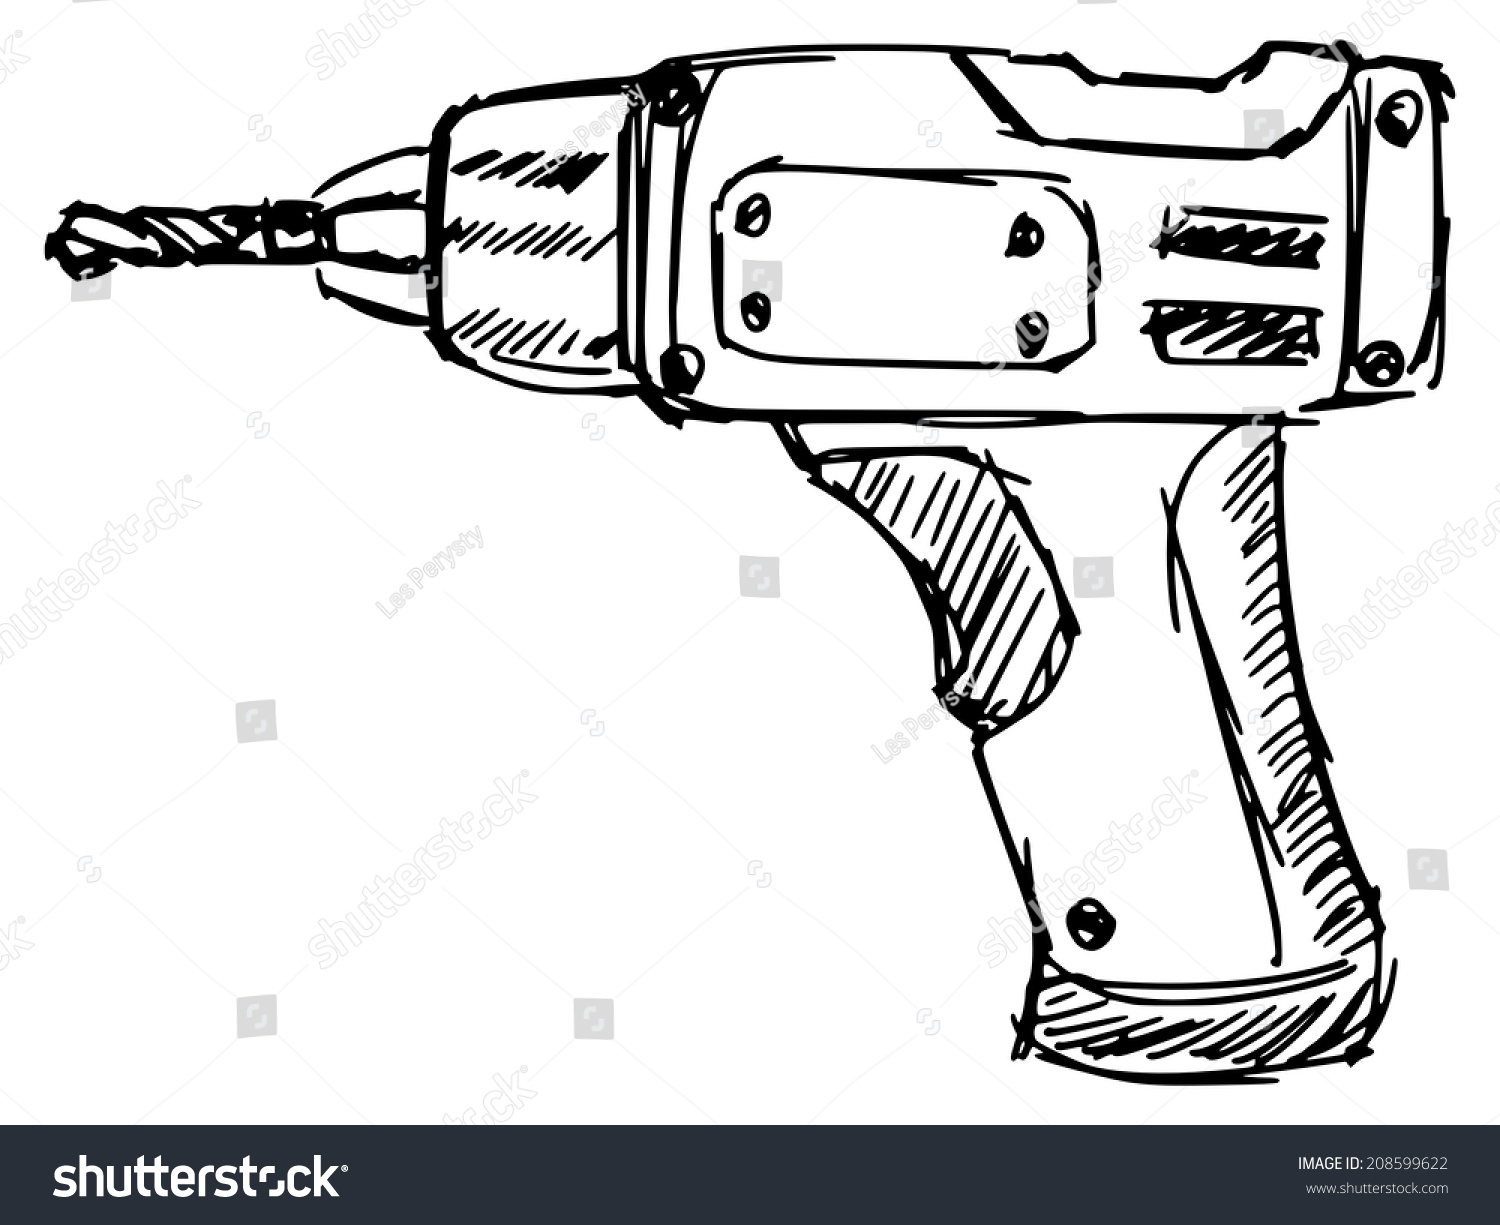 Sketch, Doodle, Hand Drawn Illustration Of Drill - 208599622 : Shutterstock